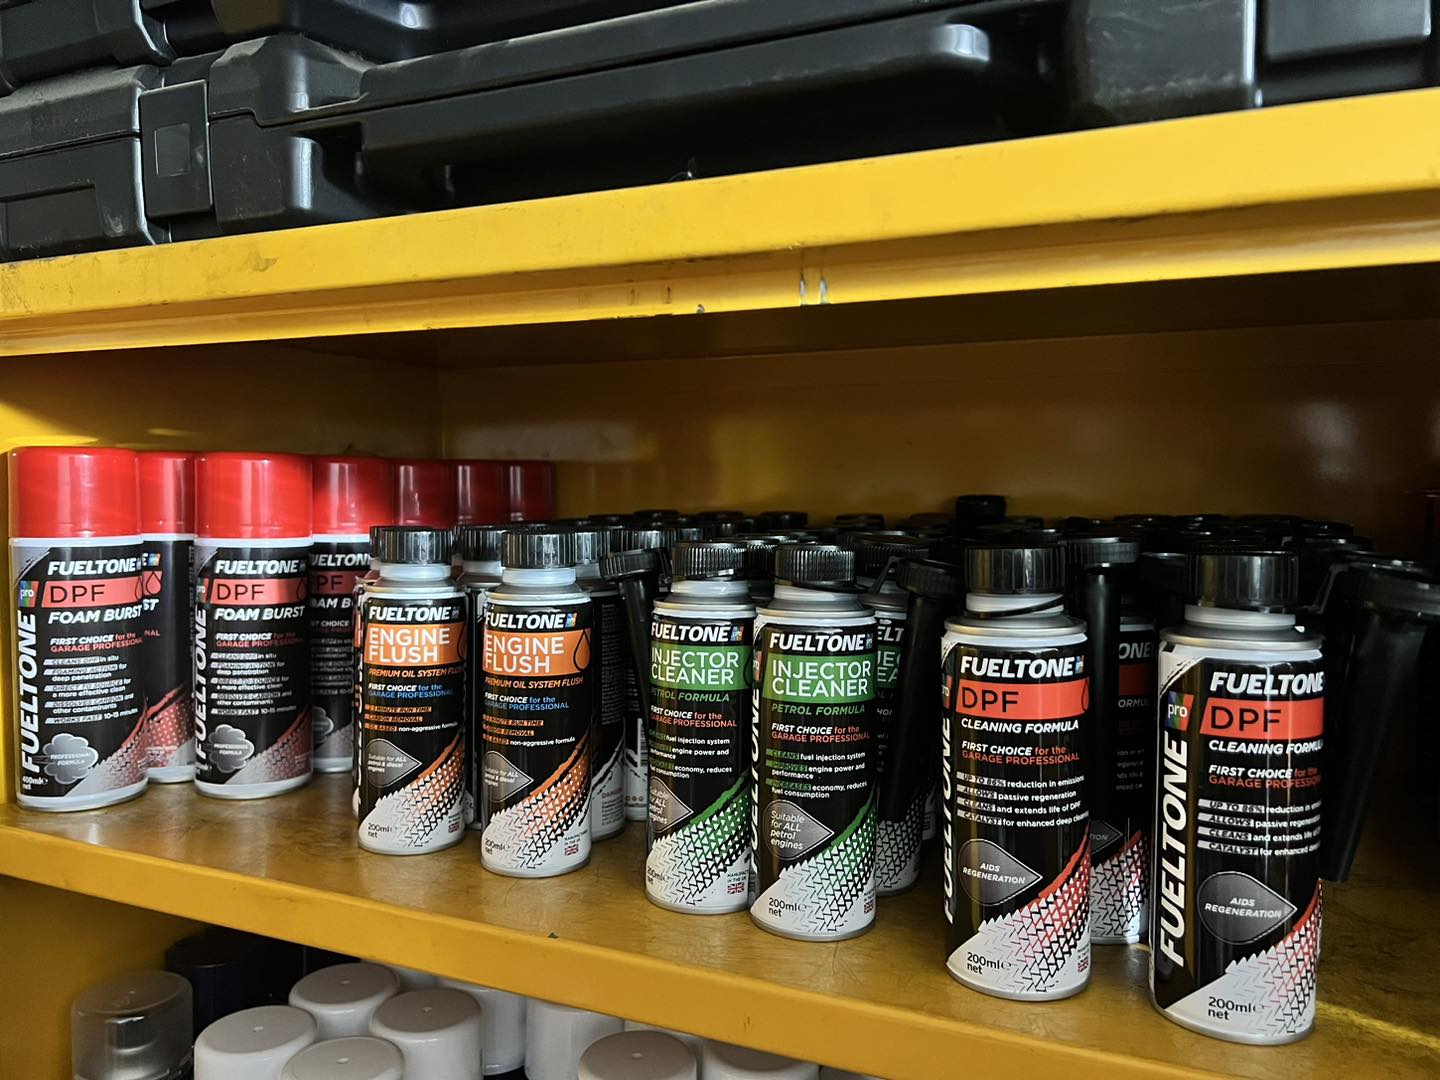 FUELTONE Pro petrol & diesel additives and DPF solutions